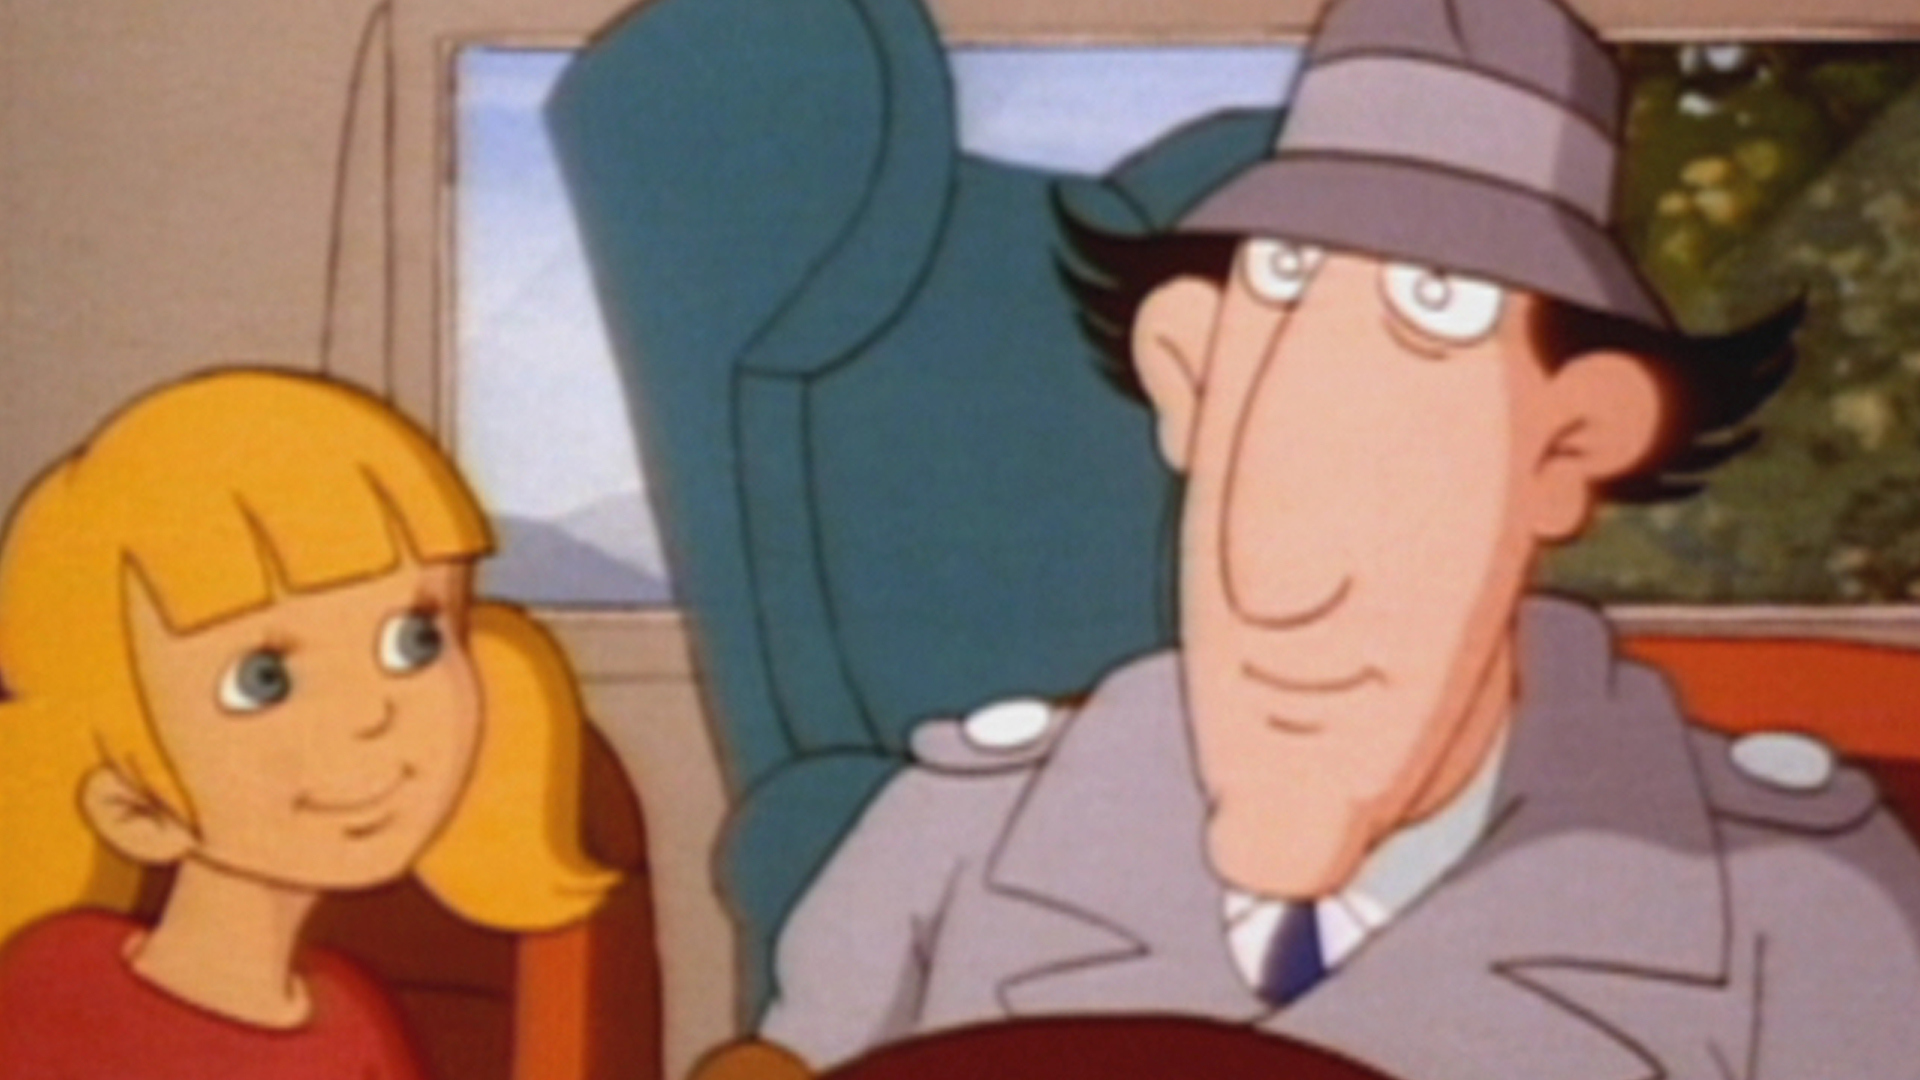 watch-inspector-gadget-season-1-episode-3-gadget-at-the-circus-full-show-on-paramount-plus